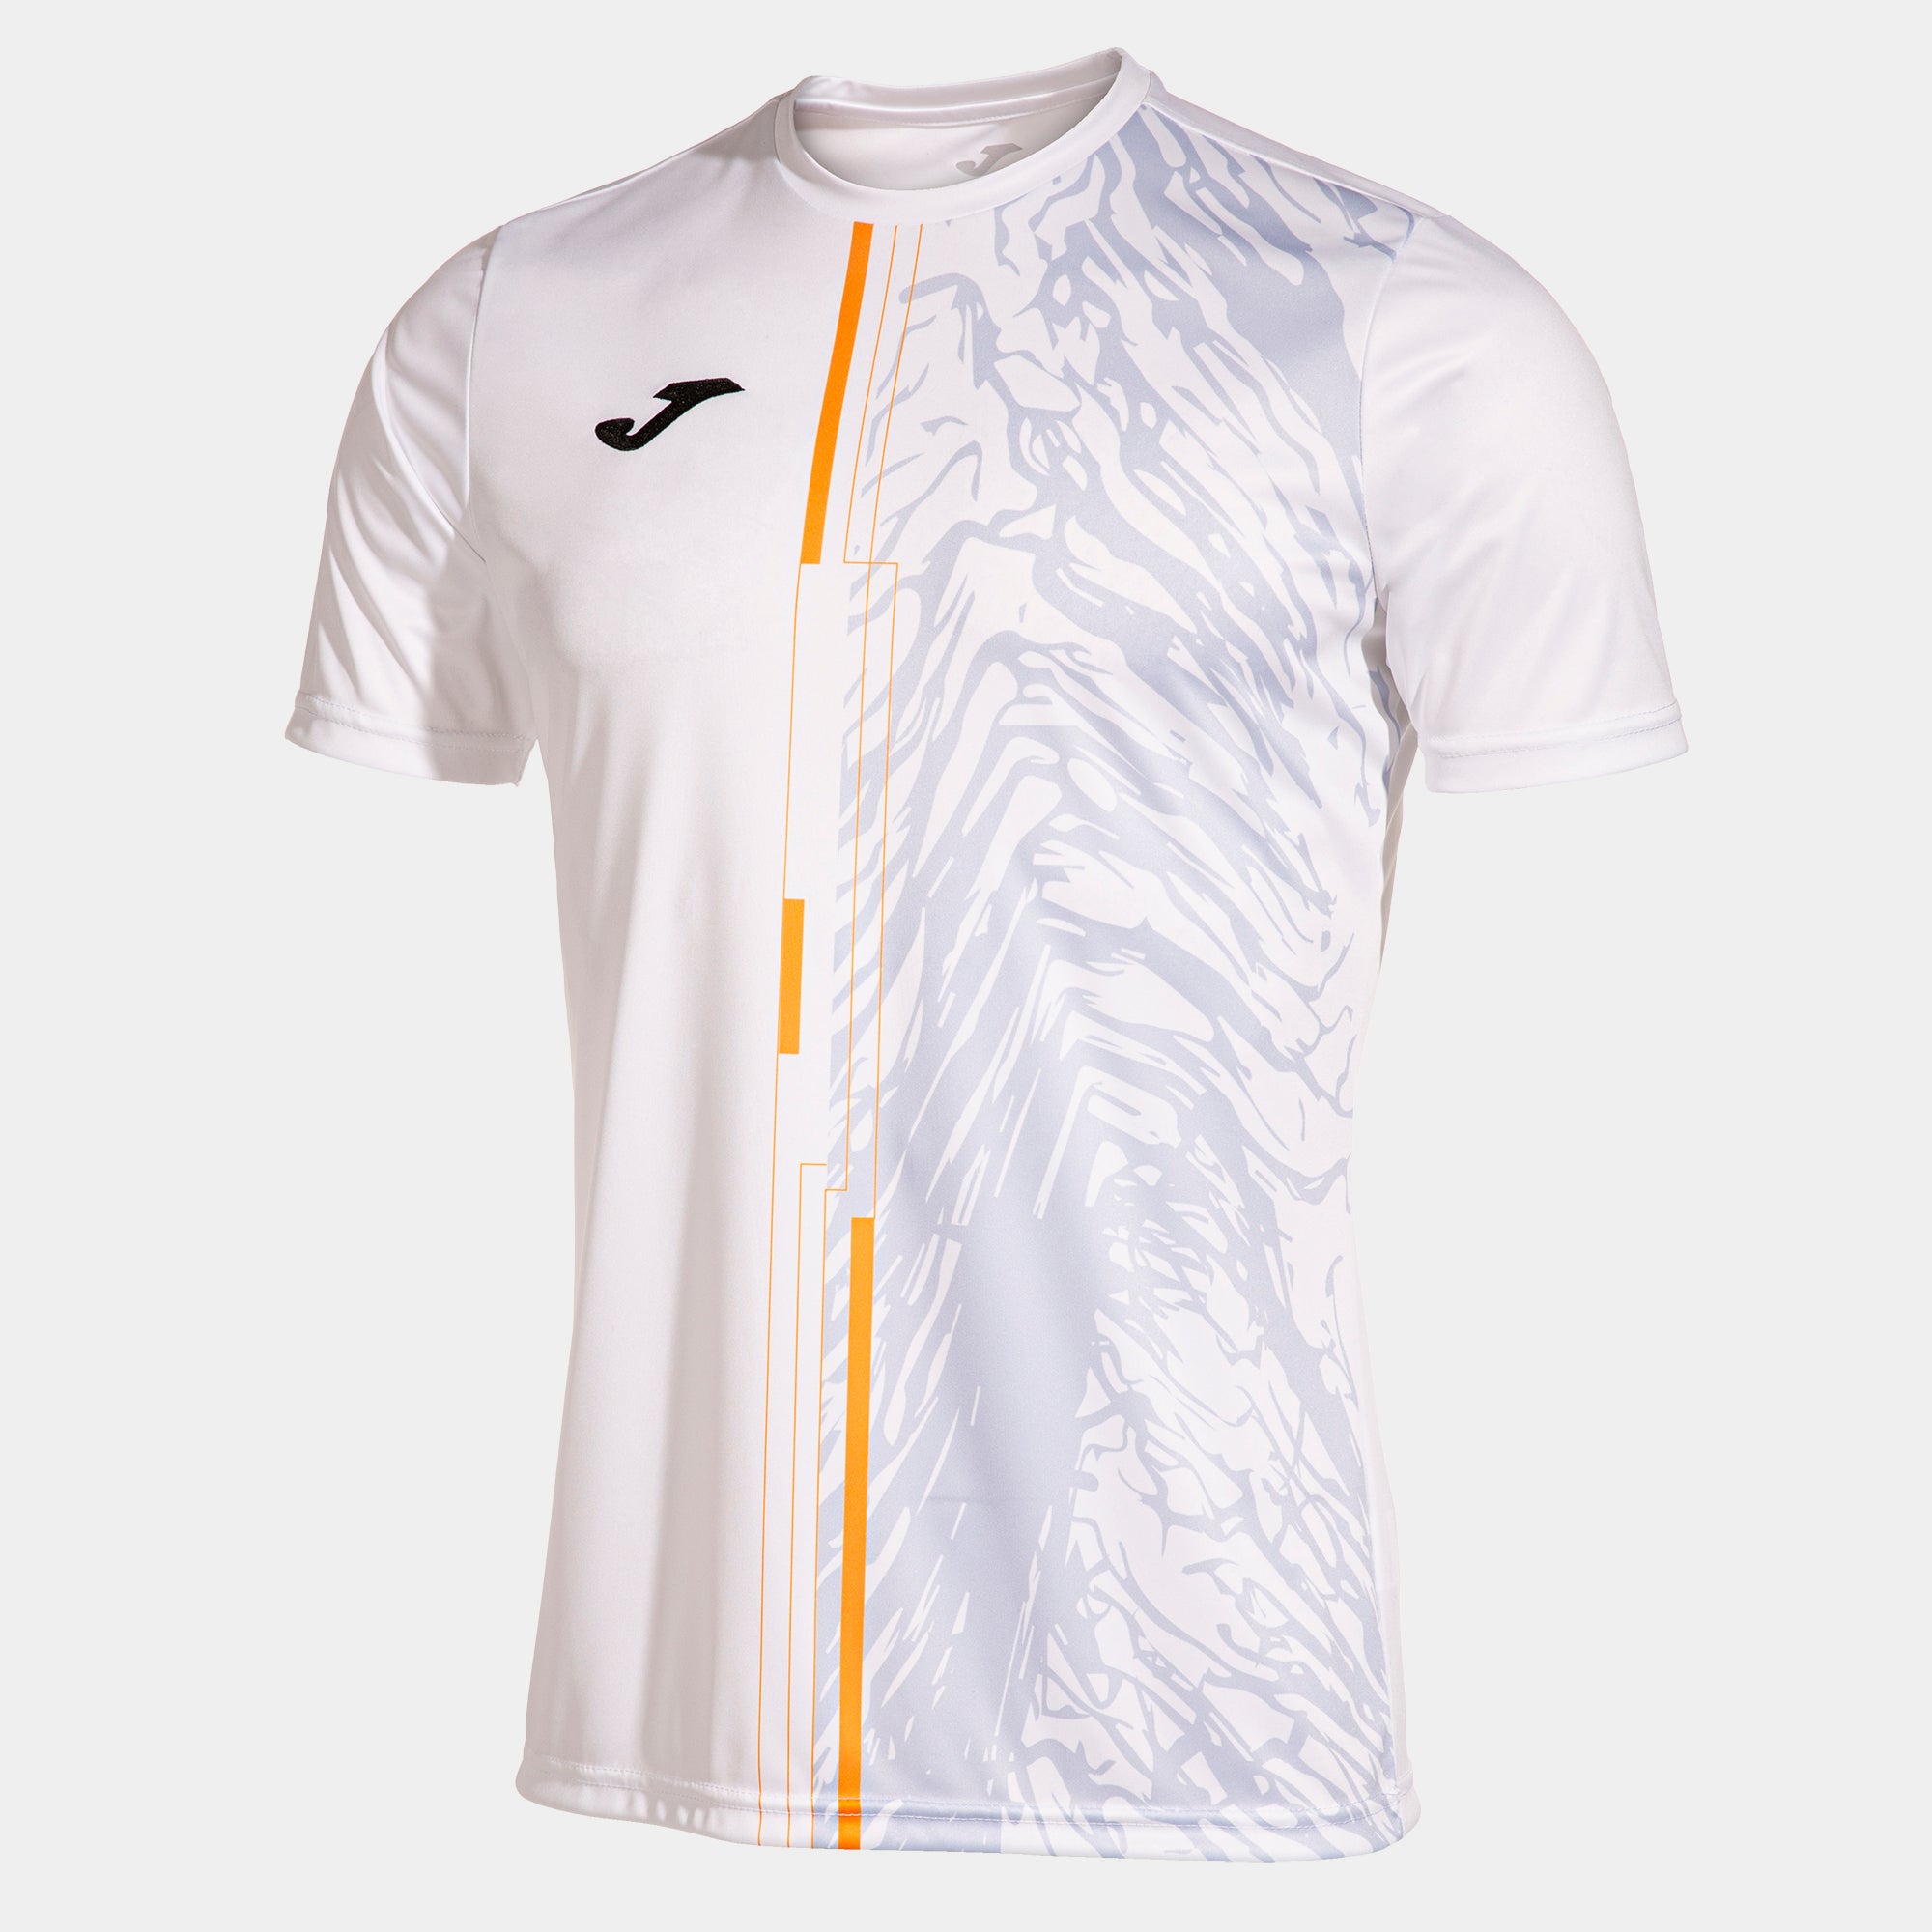 Joma ProTeam Short Sleeved T-Shirt - White/Grey